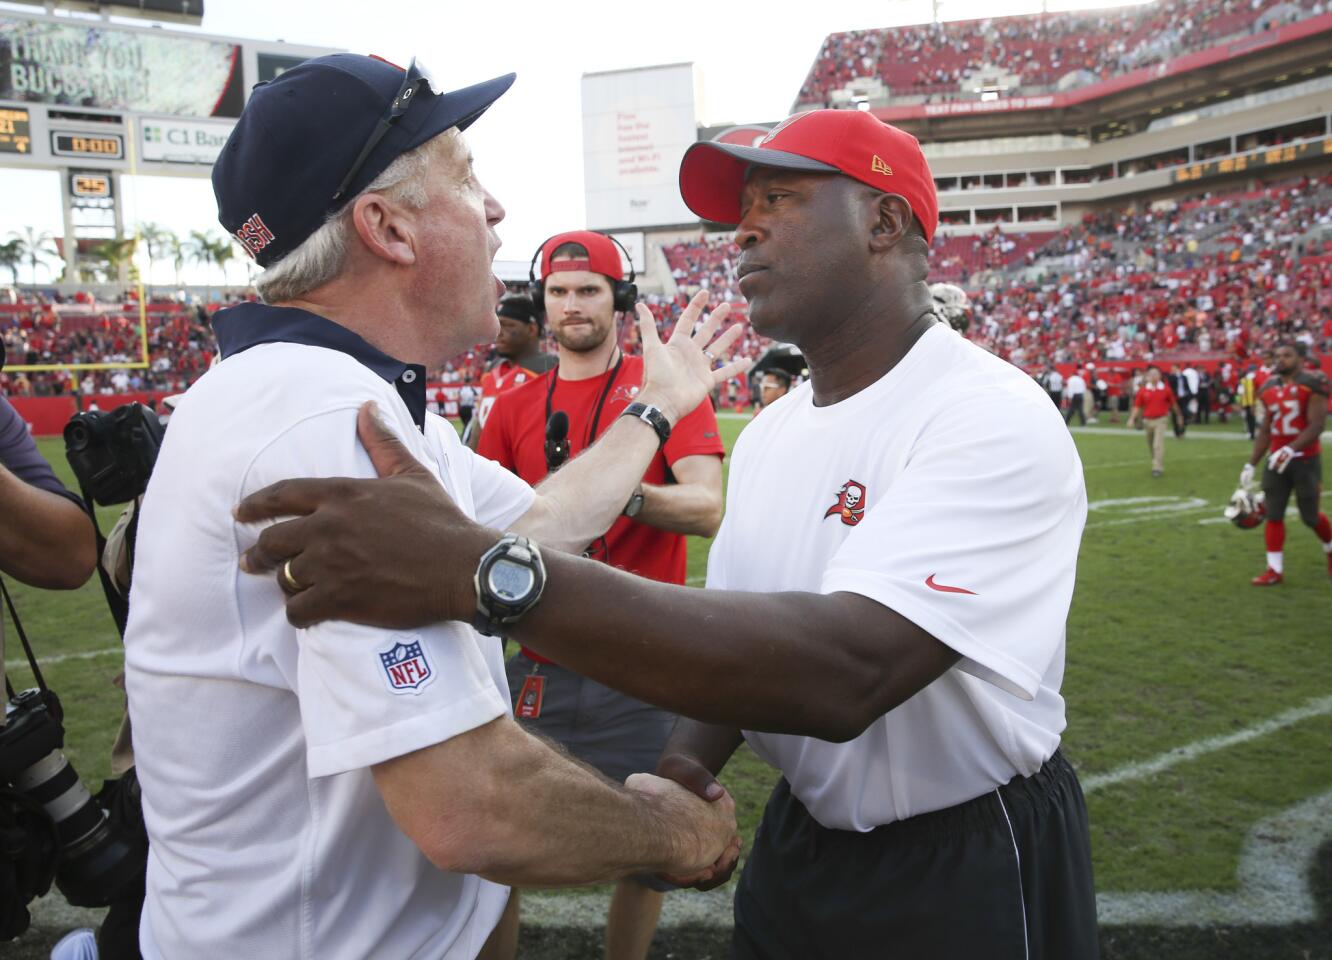 Bears coach John Fox, left, with Buccaneers coach Lovie Smith at the end of their teams' game at Raymond James Field in Tampa, Fla. The Bears won 26-21 on Dec. 27, 2015.